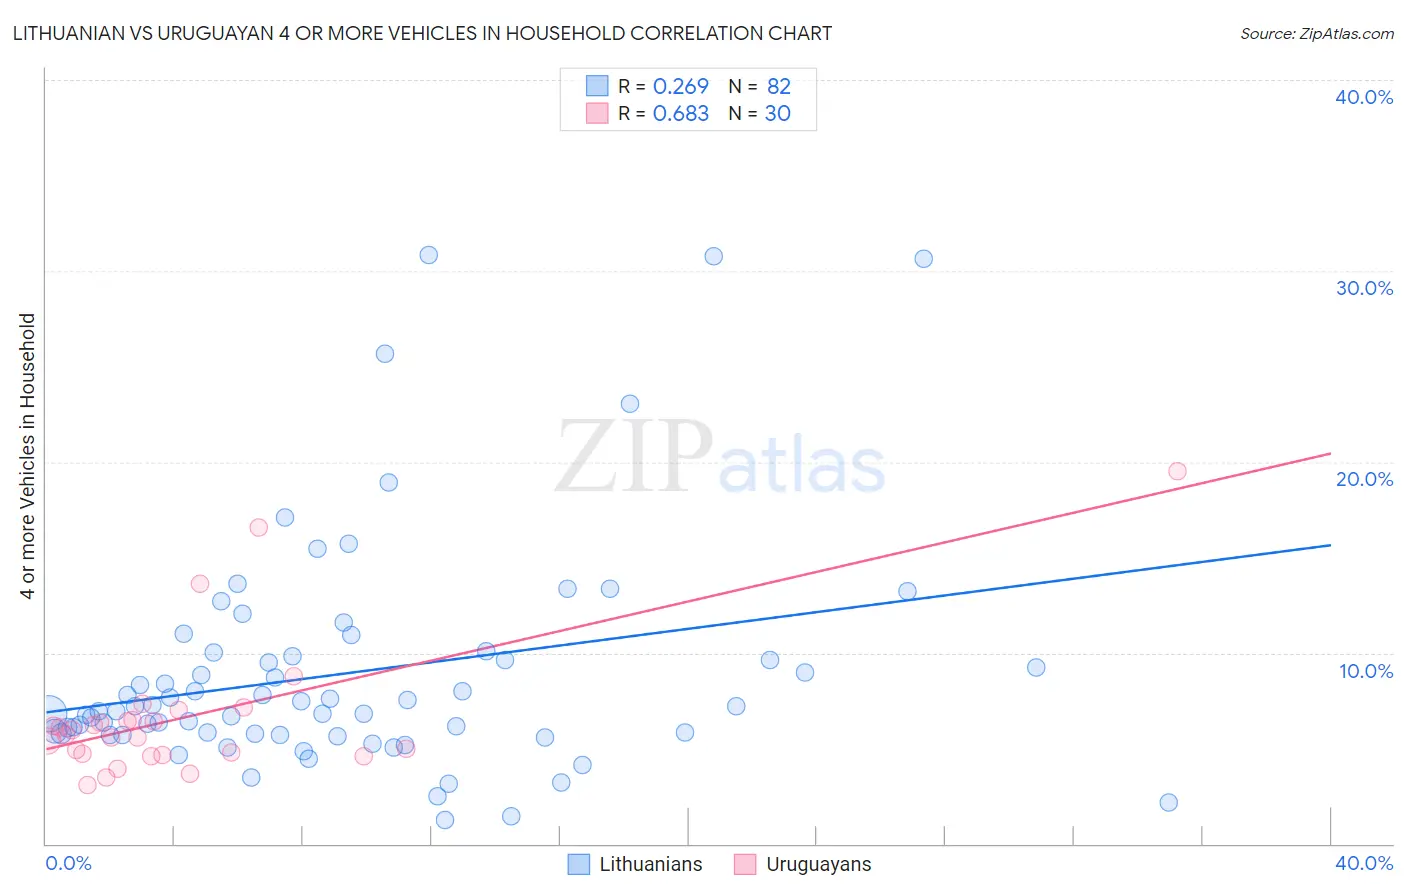 Lithuanian vs Uruguayan 4 or more Vehicles in Household